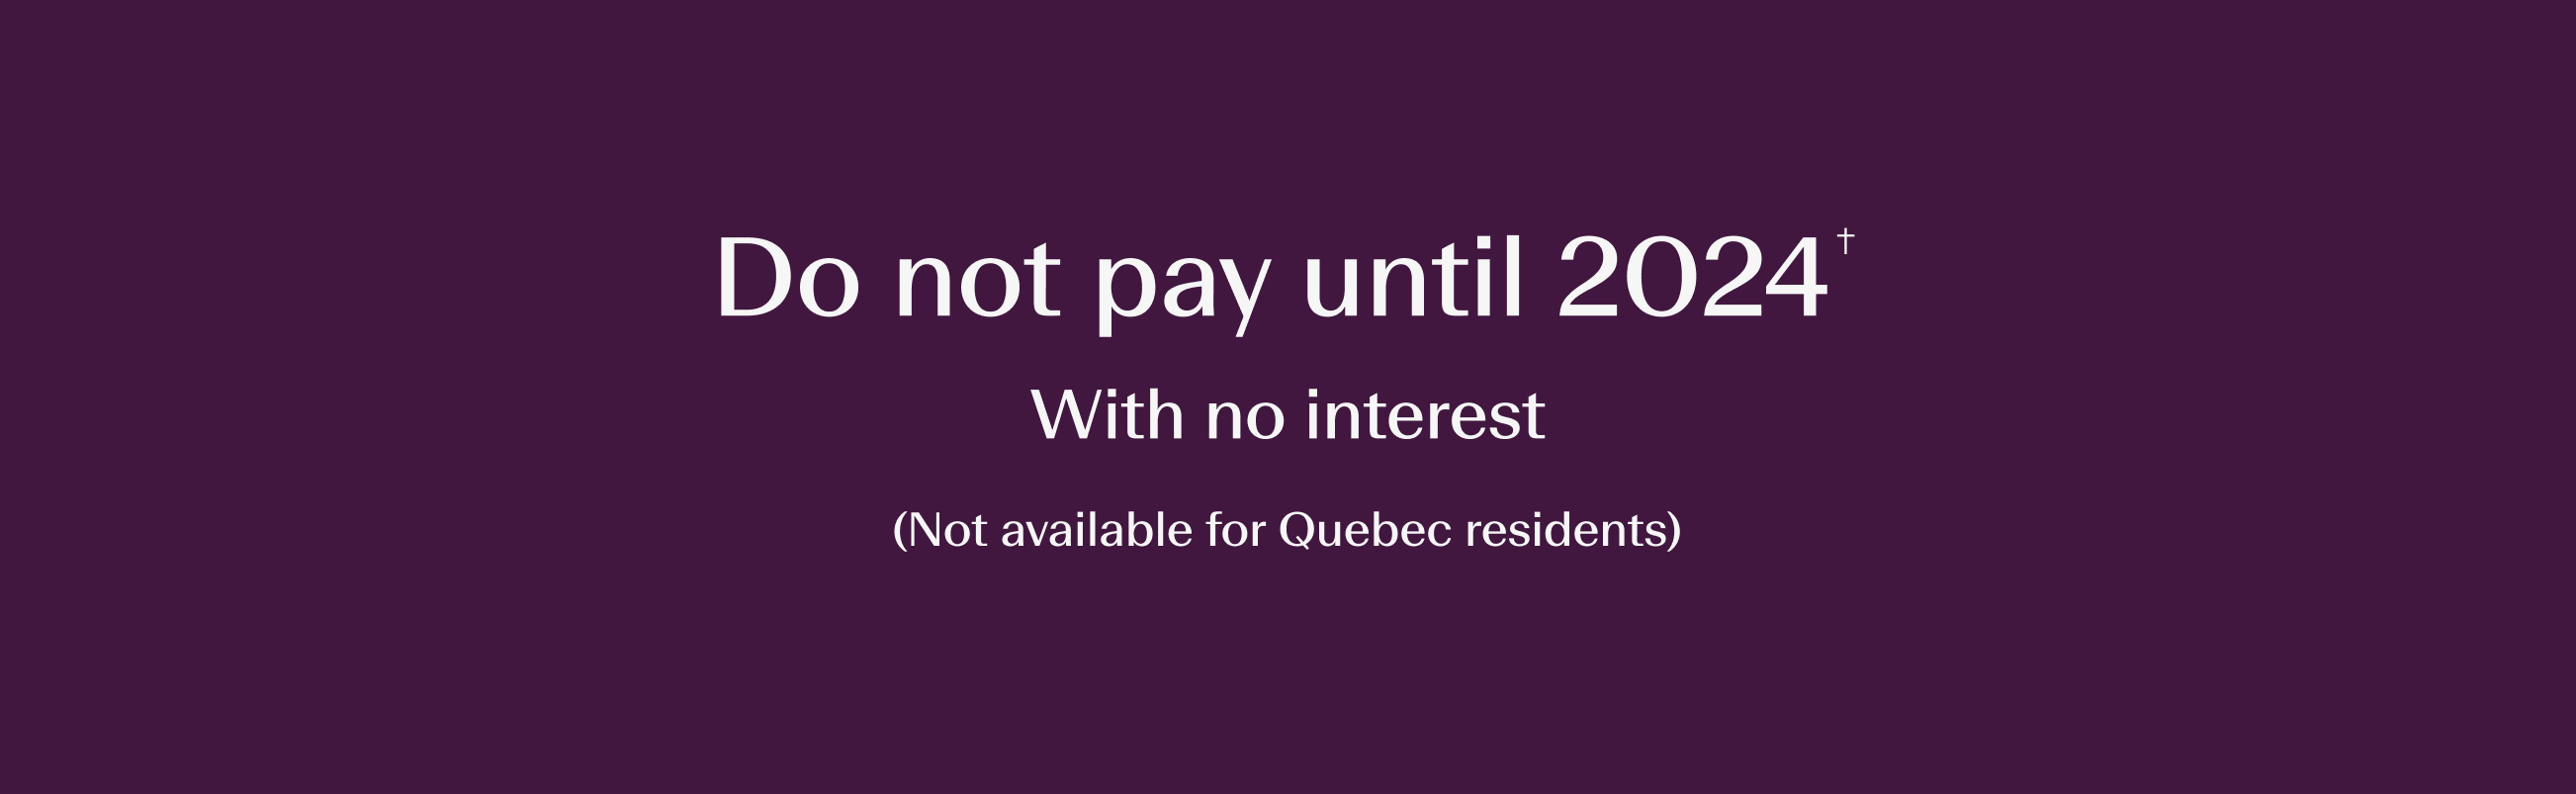 Do not pay until 2024. 18 Months deferred, no interest. (Not available for Quebec residents)